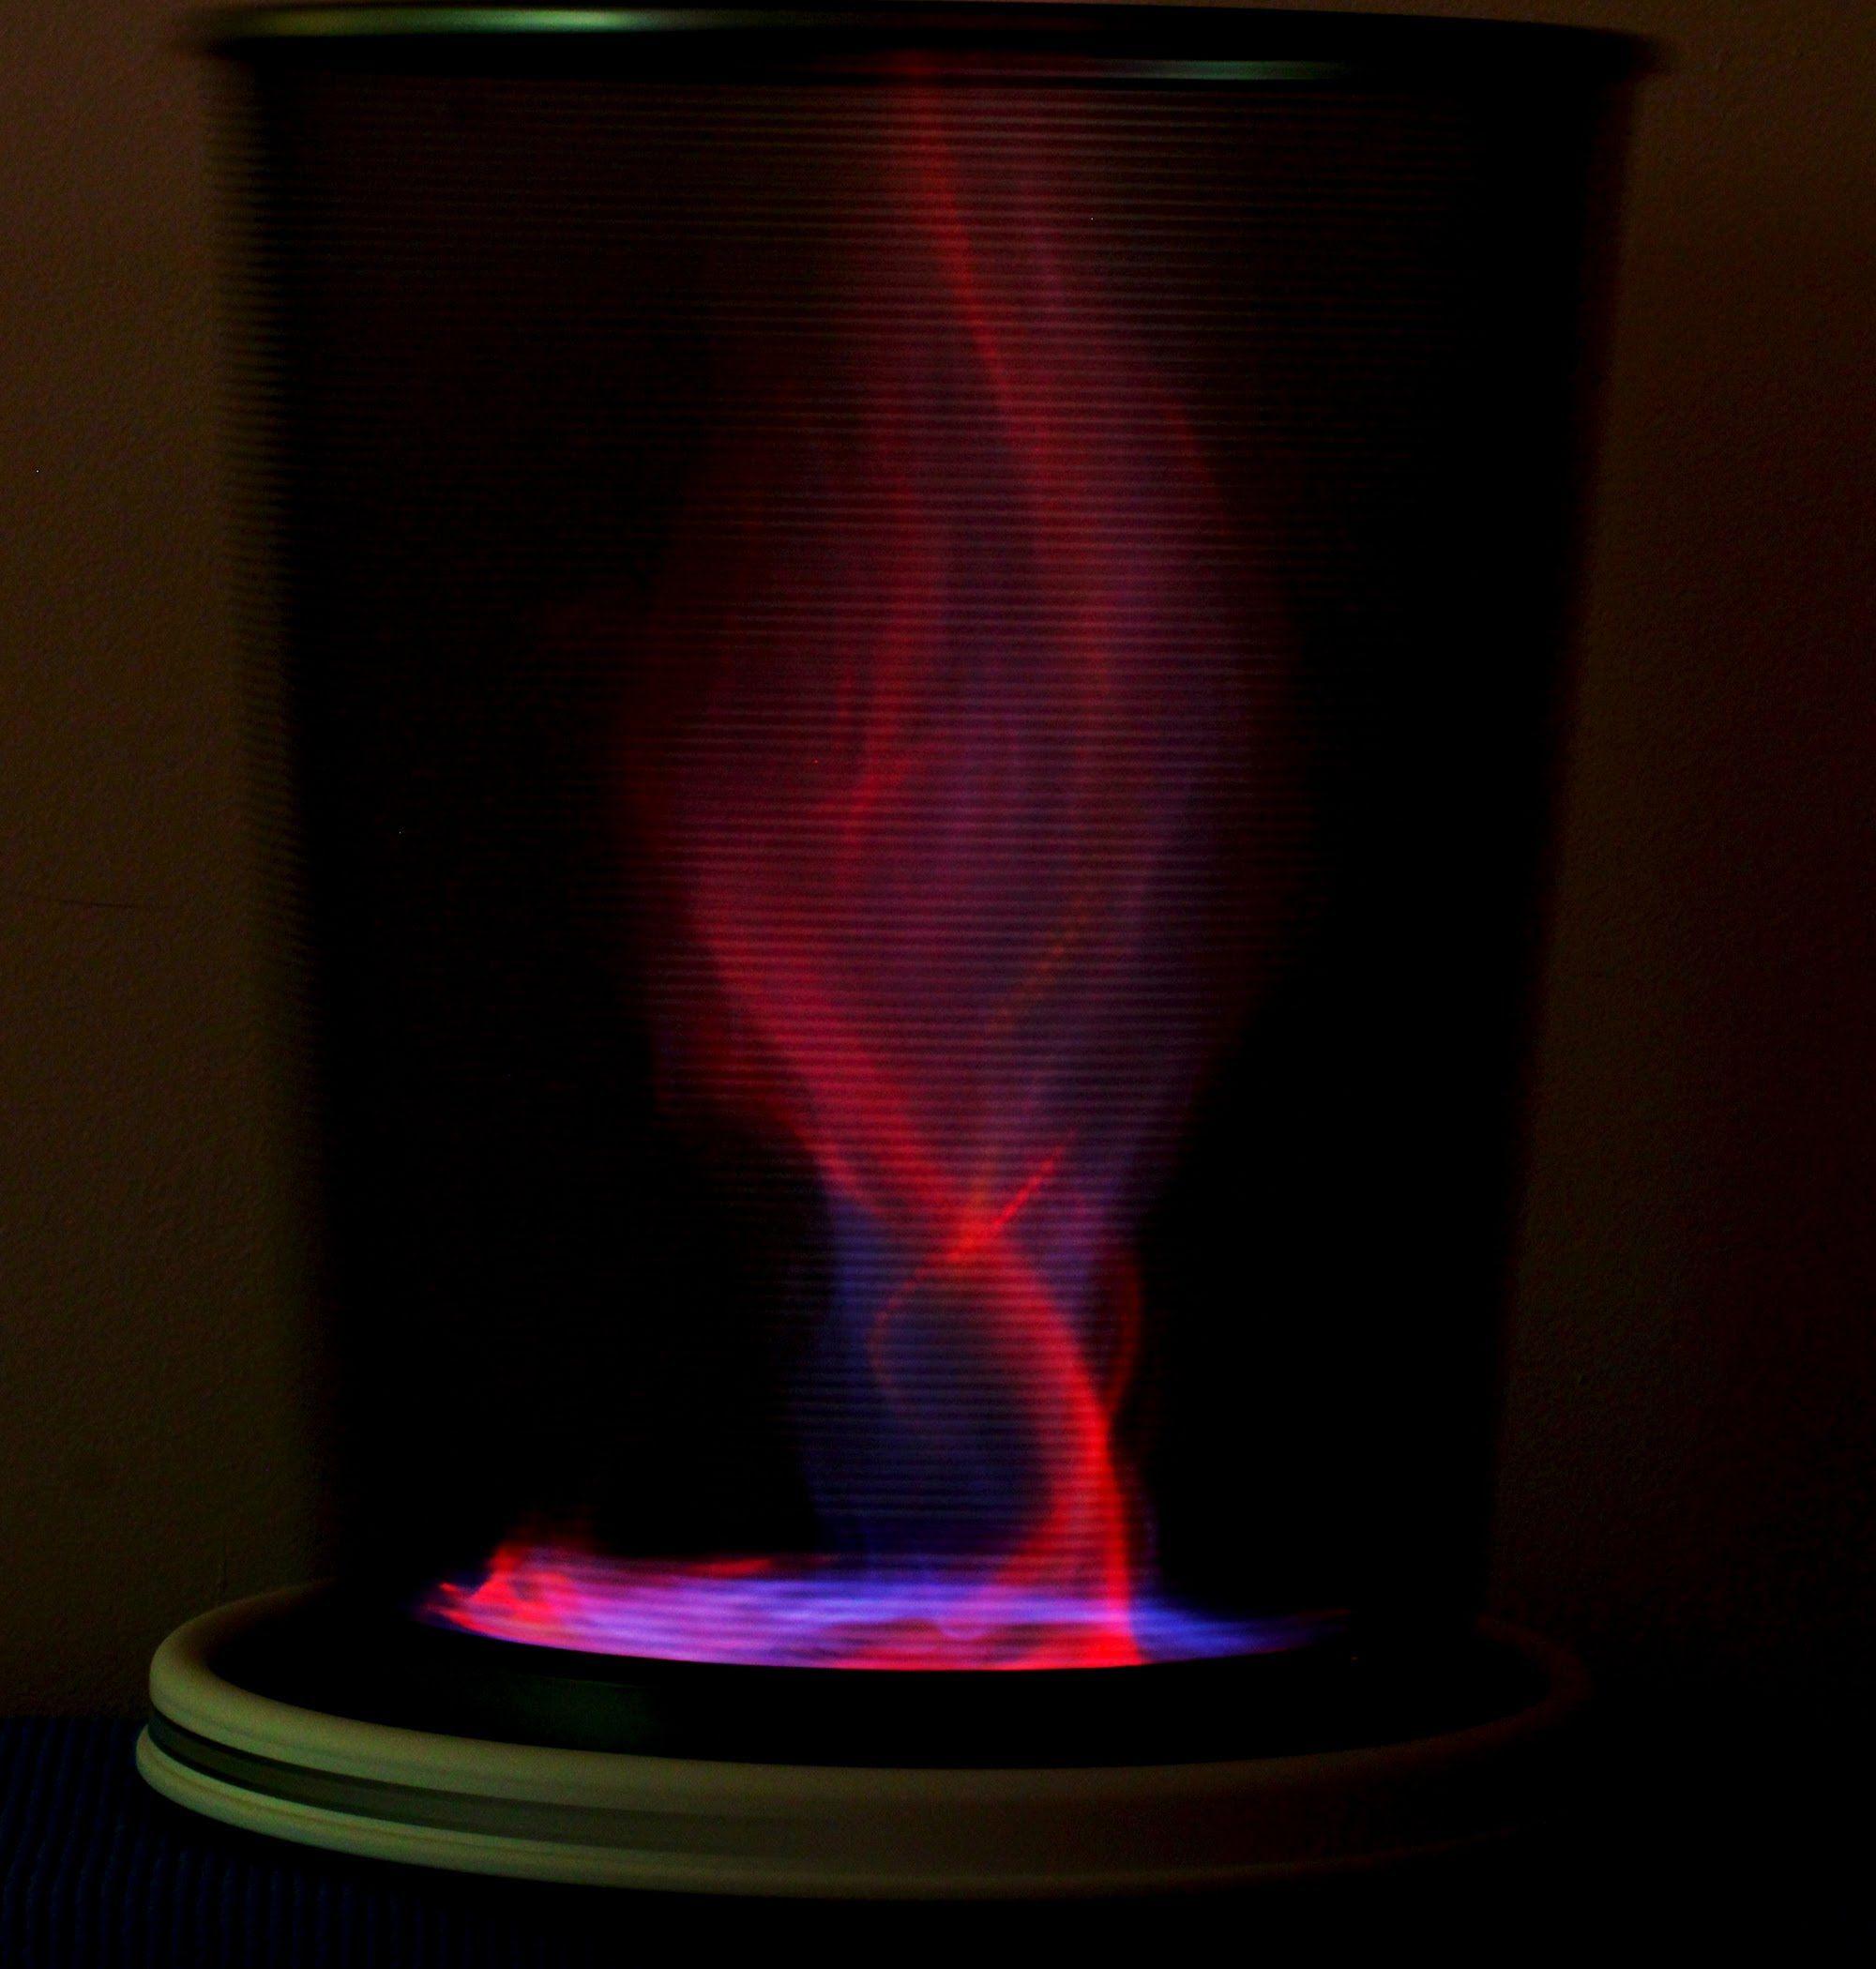 Fire Tornado with Red and Blue Flames